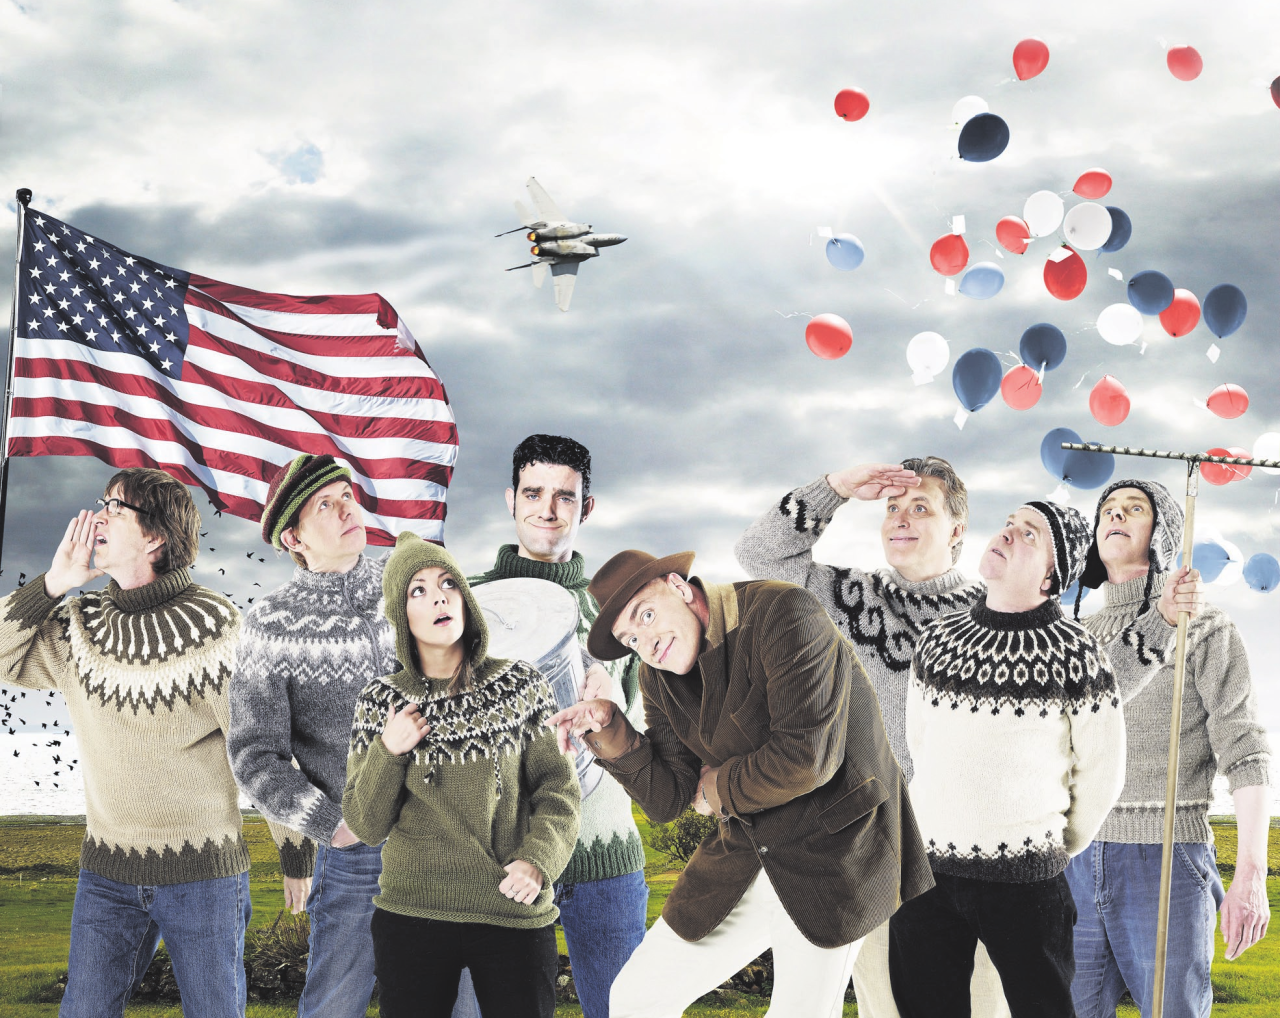 Cover of Stuðmenn's tour in 2006 with the whole band at a field dressed in Icelandic sweaters with an american flag, a military aircraft and balloons in the colors of the American flag is in the sky